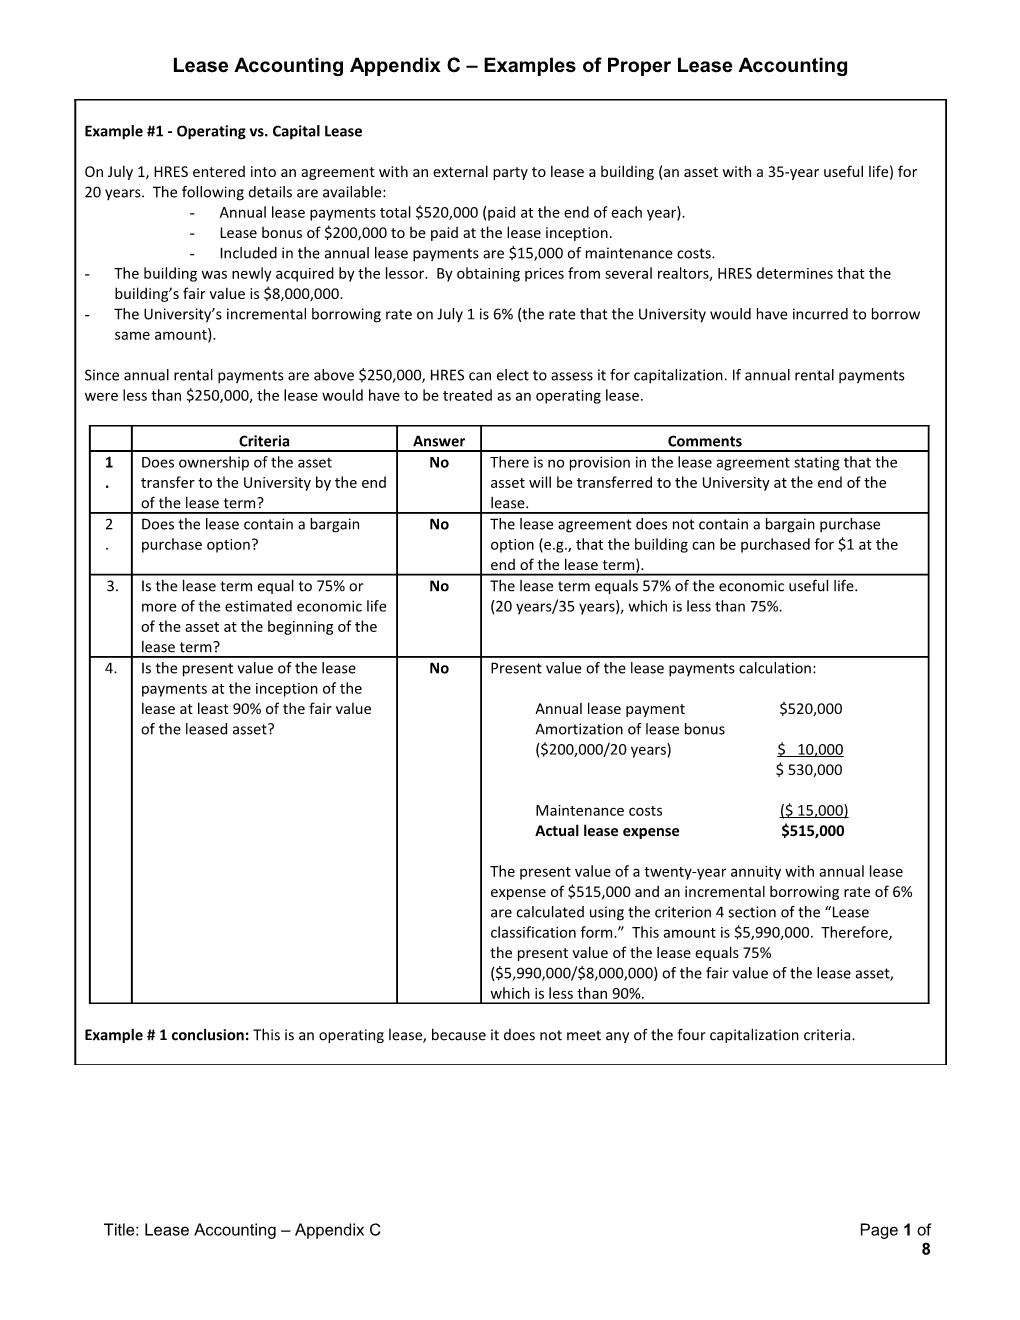 Lease Accounting Appendix C Examples of Proper Lease Accounting